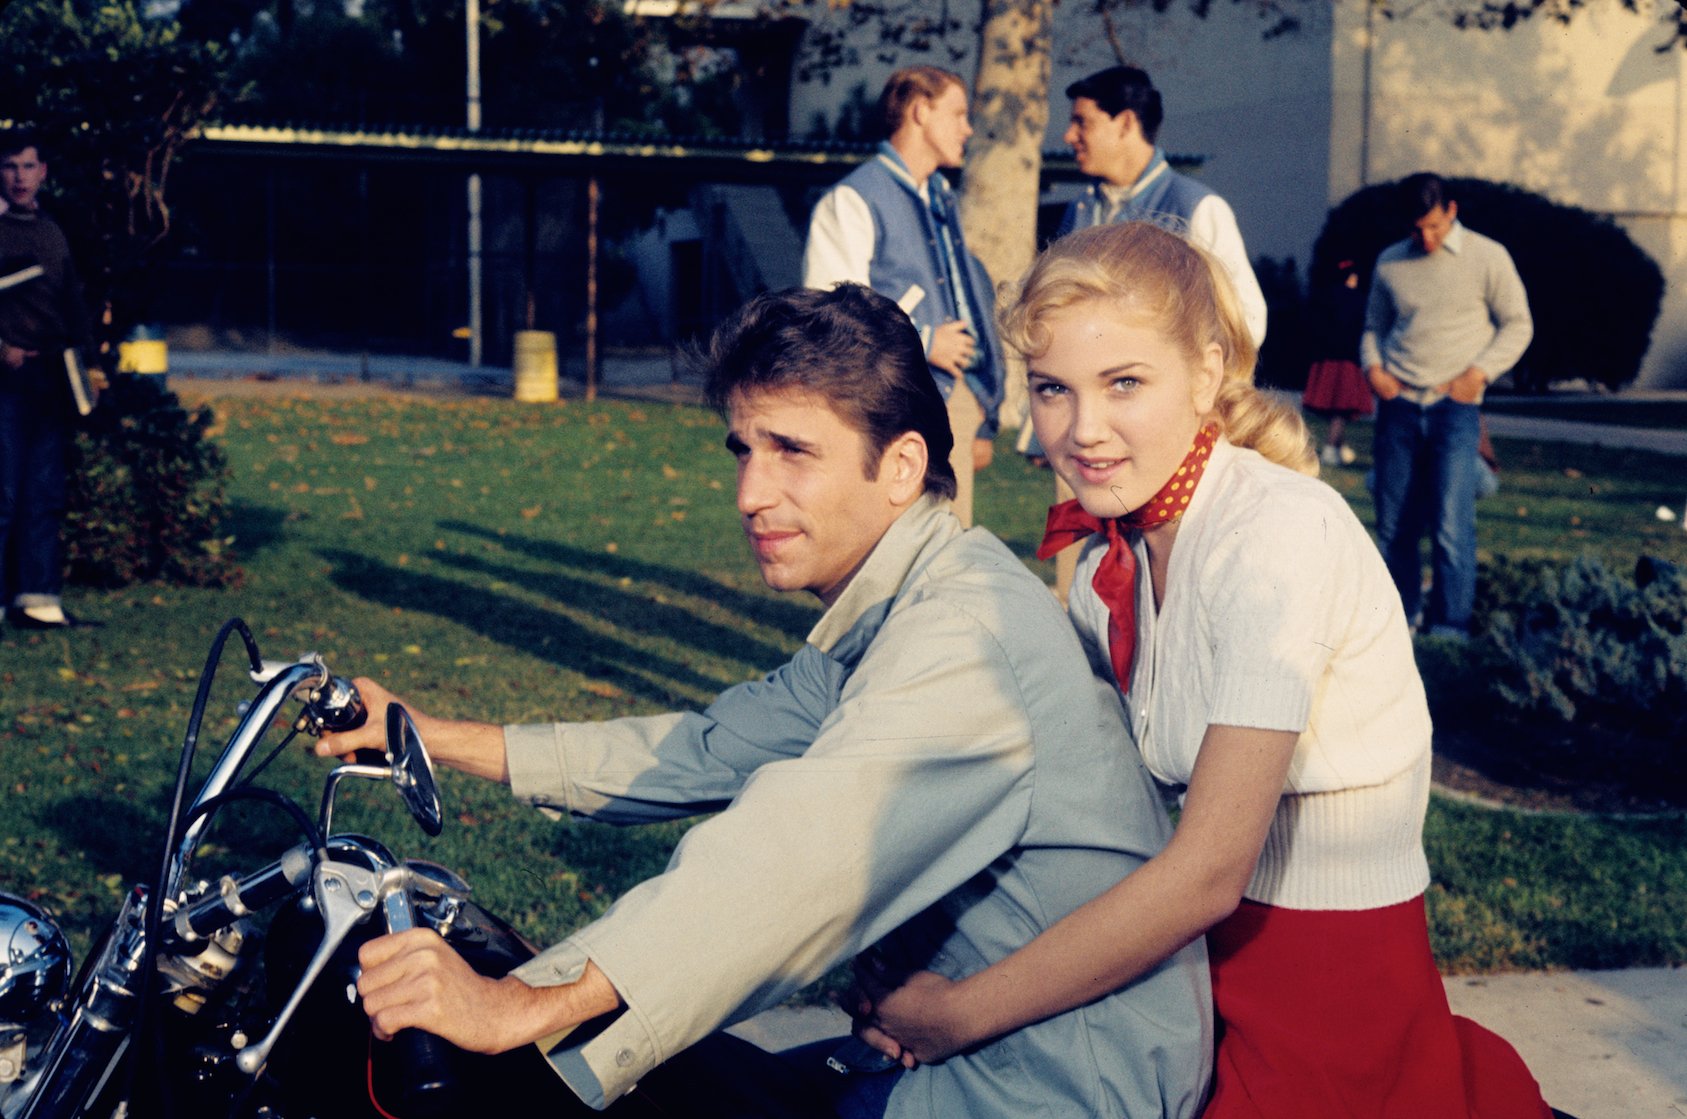 Ron Howard, Henry Winkler, Anson Williams, and Kathy O'Dare in 'Happy Days' 